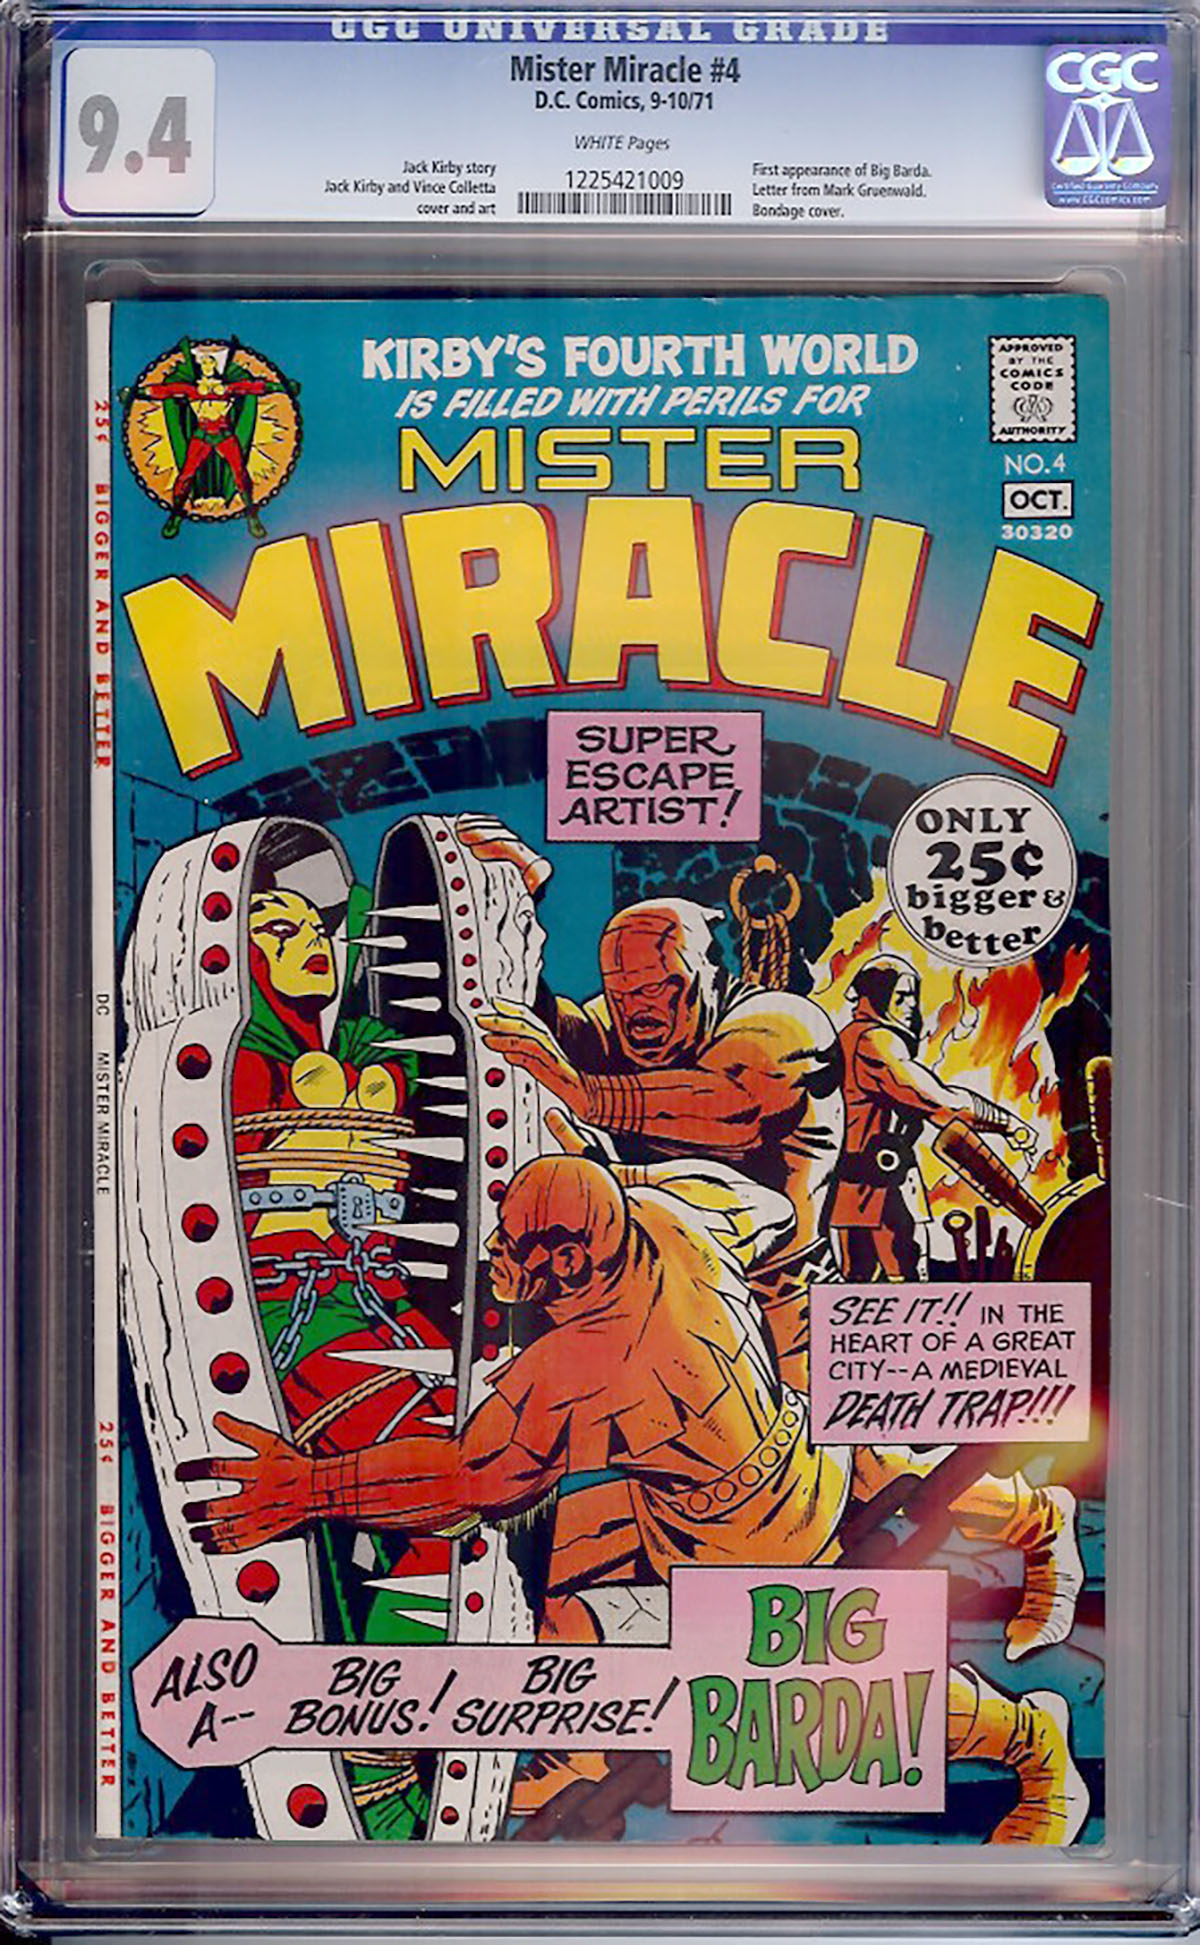 Mister Miracle #4 CGC 9.4 w